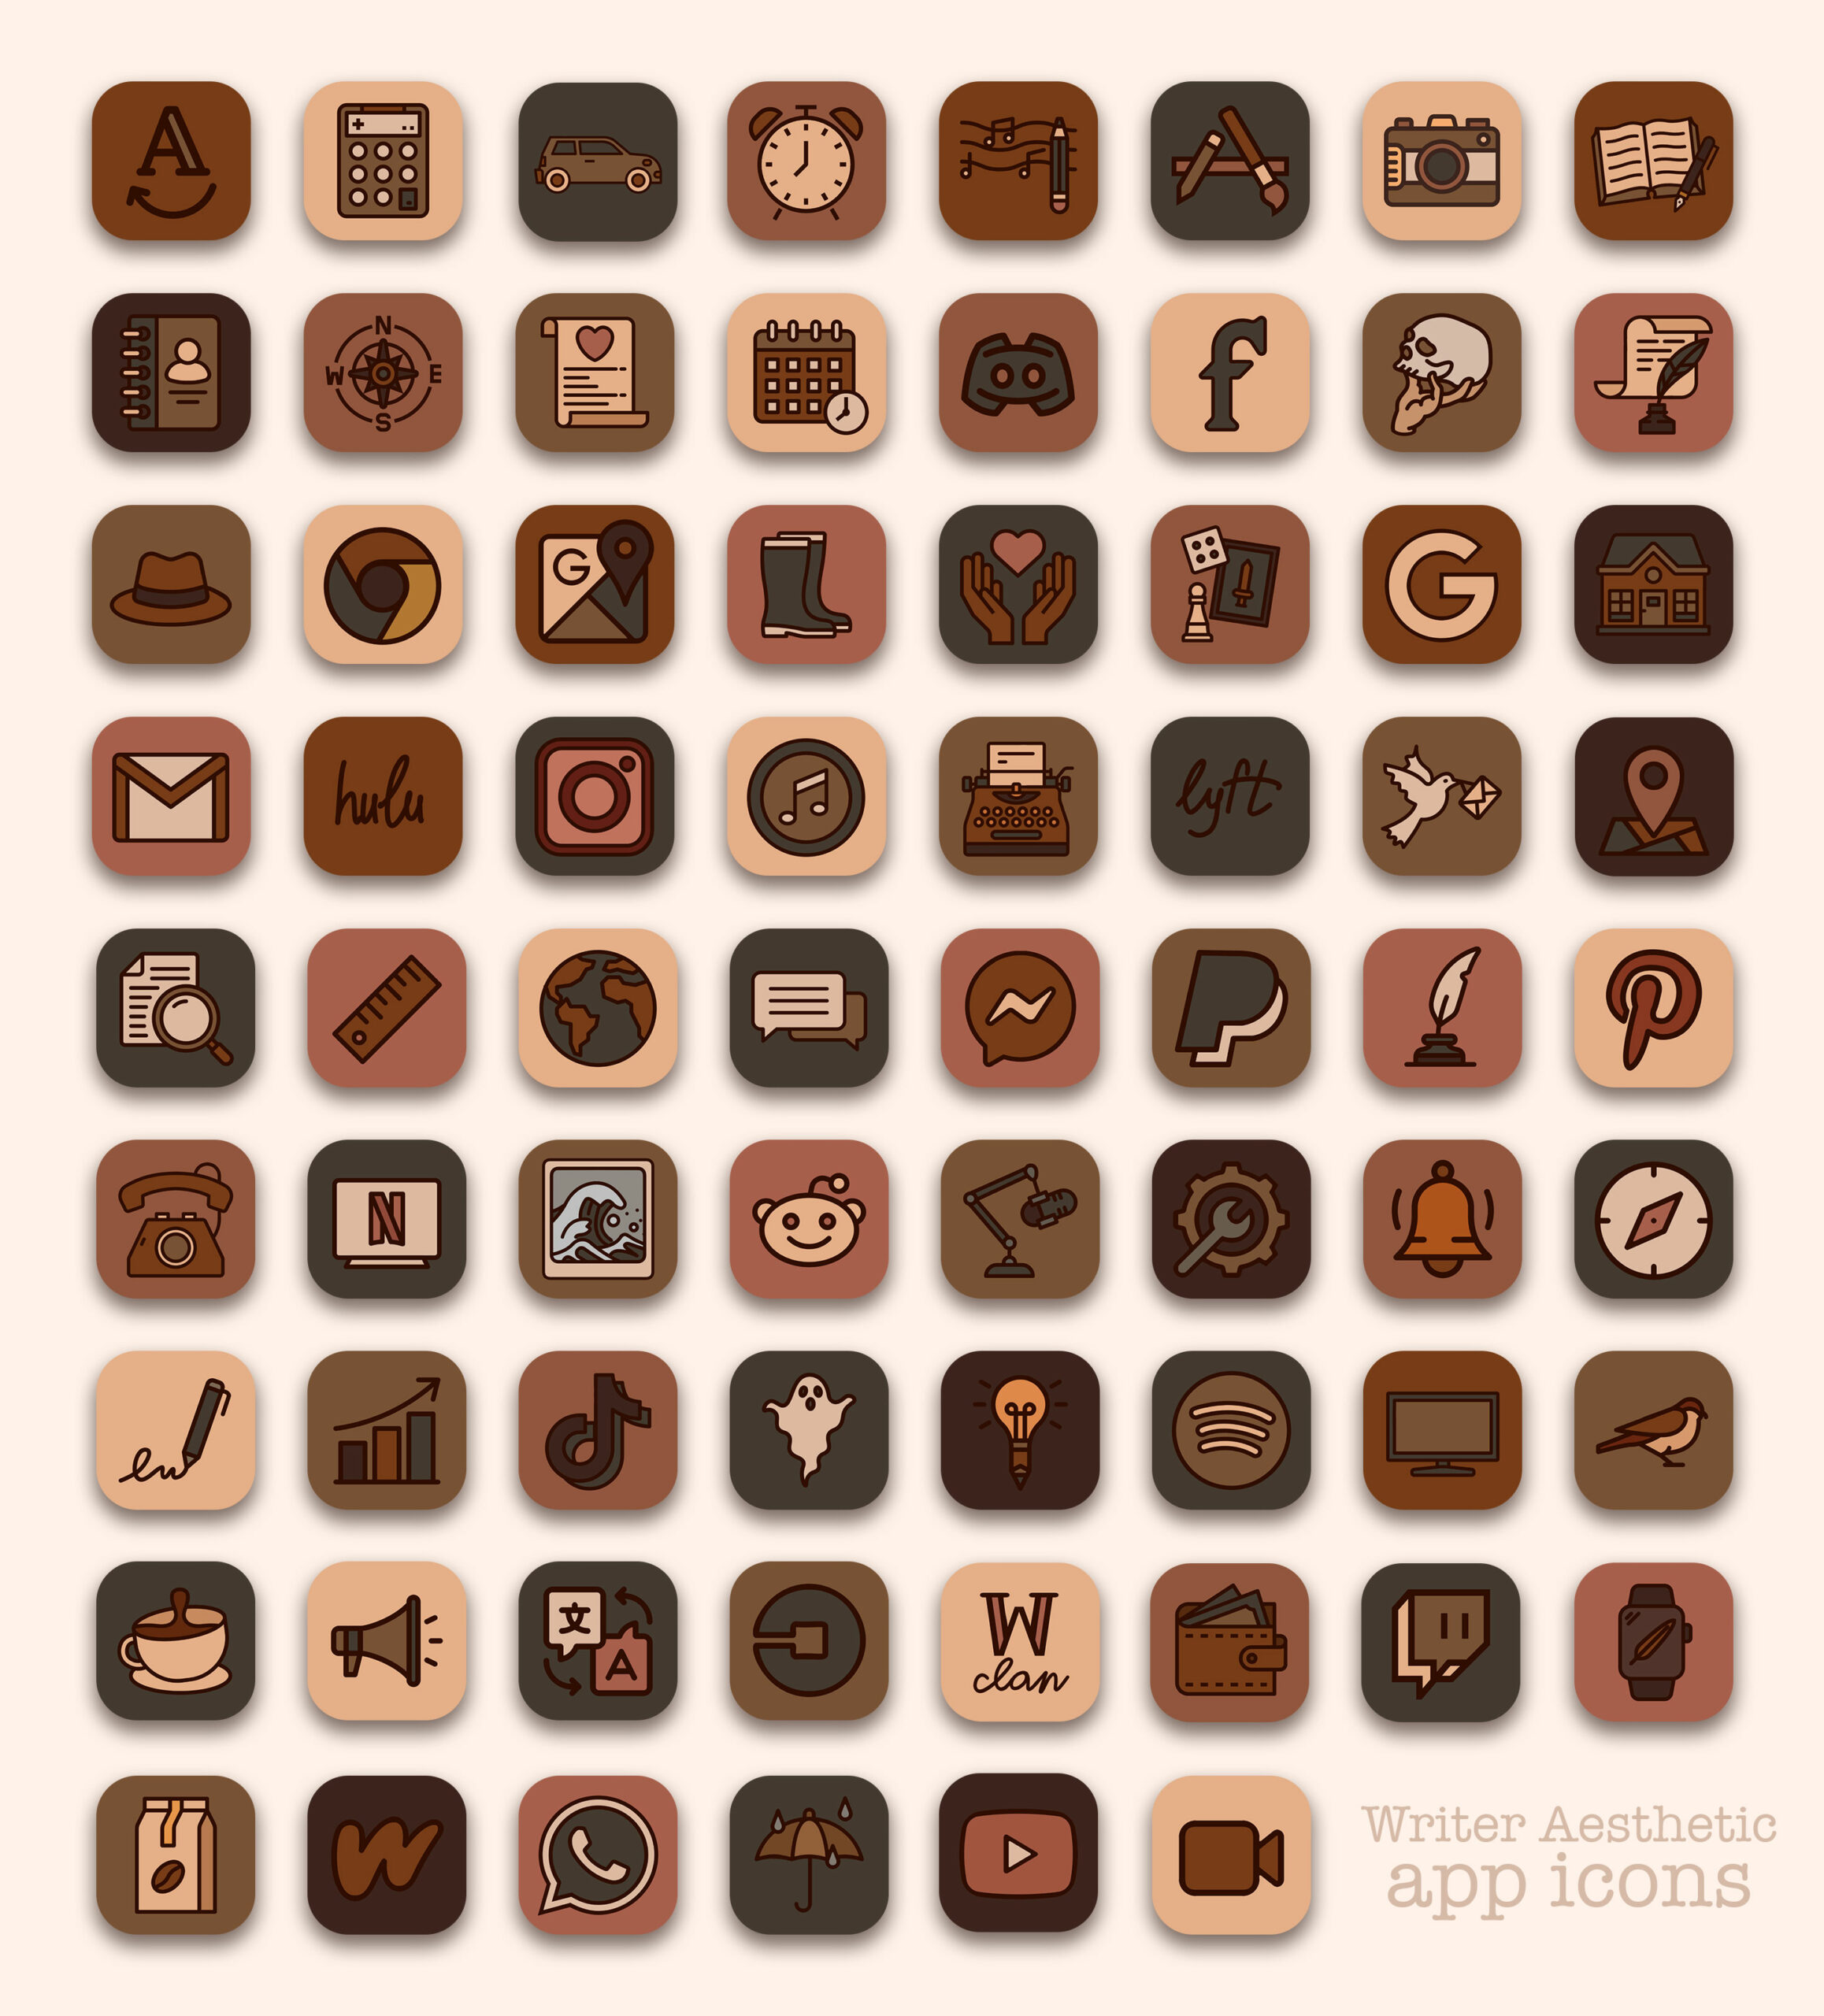 writer aesthetic app icons pack preview 2